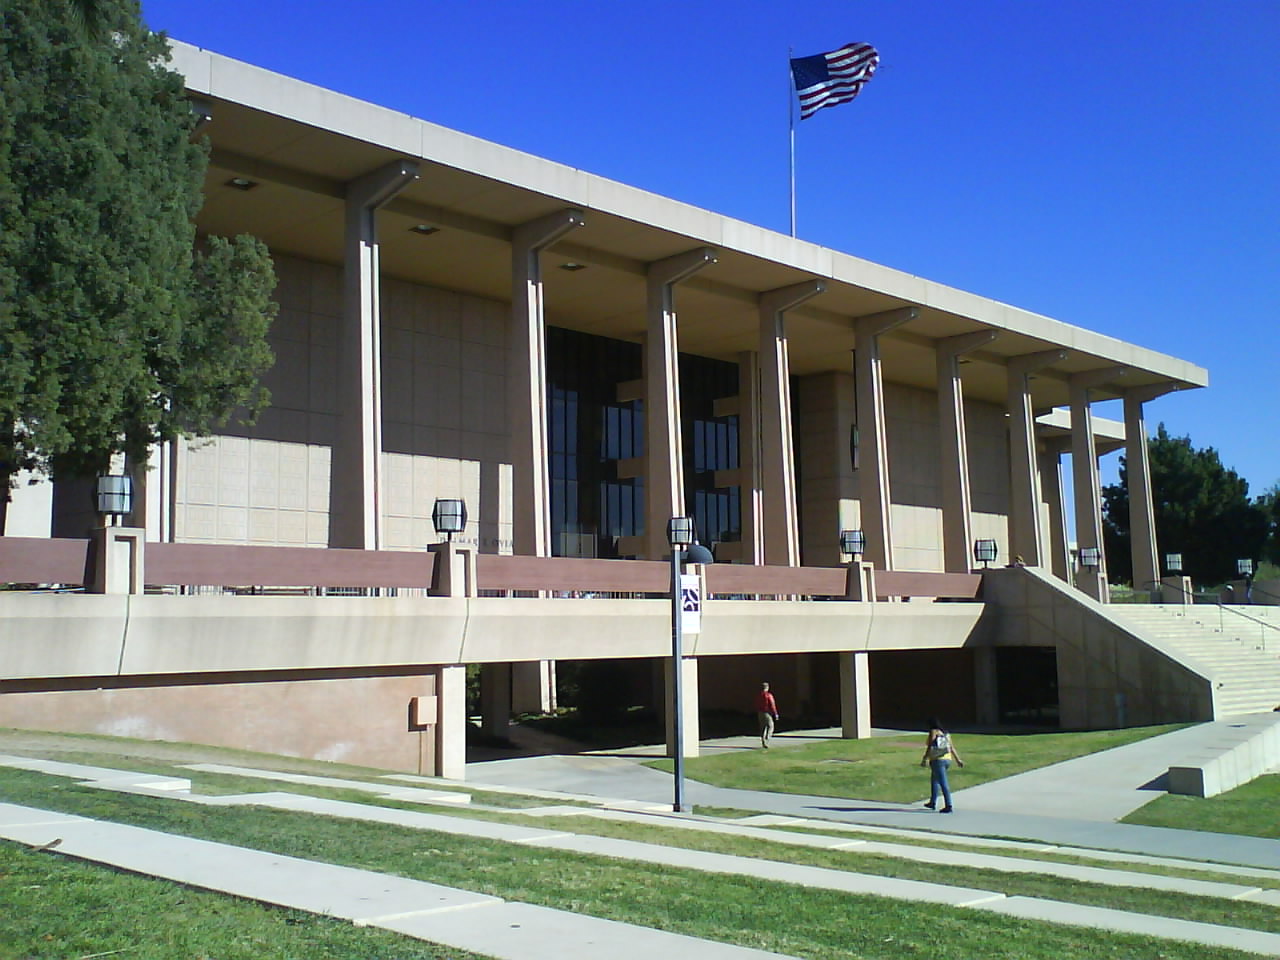 17-extraordinary-facts-about-oviatt-library